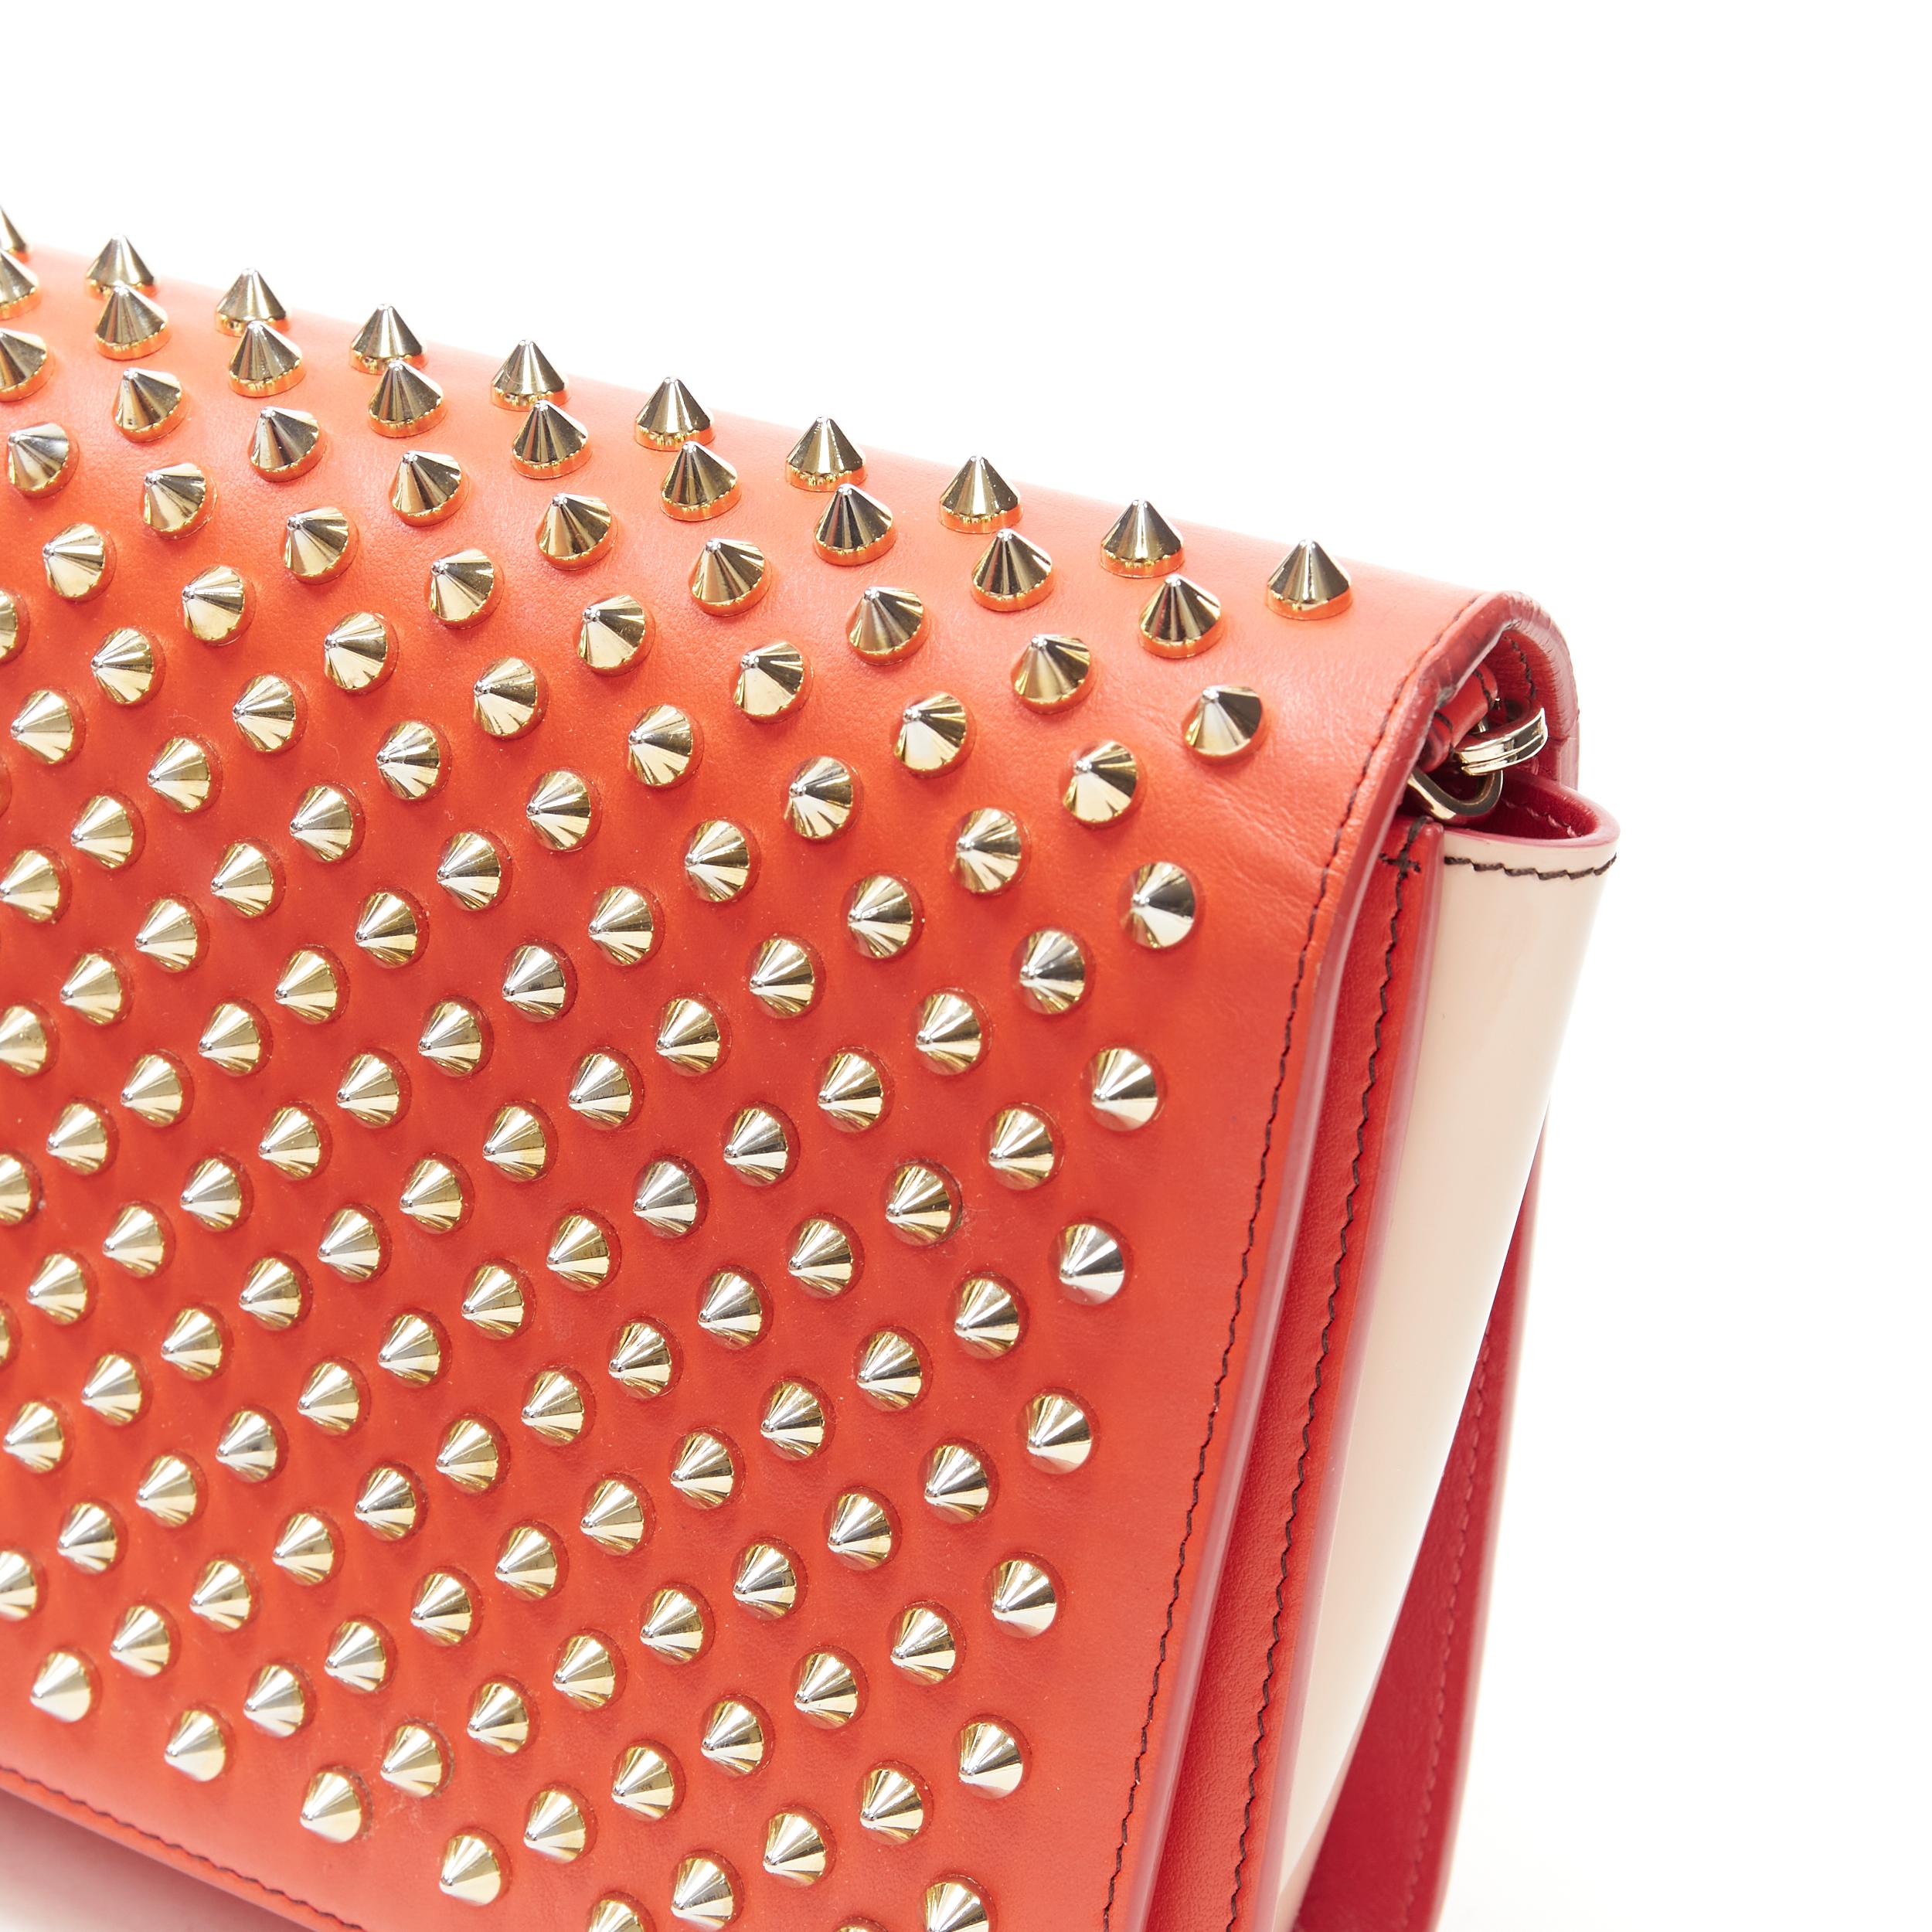 CHRISTIAN LOUBOUTIN Paloma red gold spike stud pink gusset shoulder chain bag For Sale 3